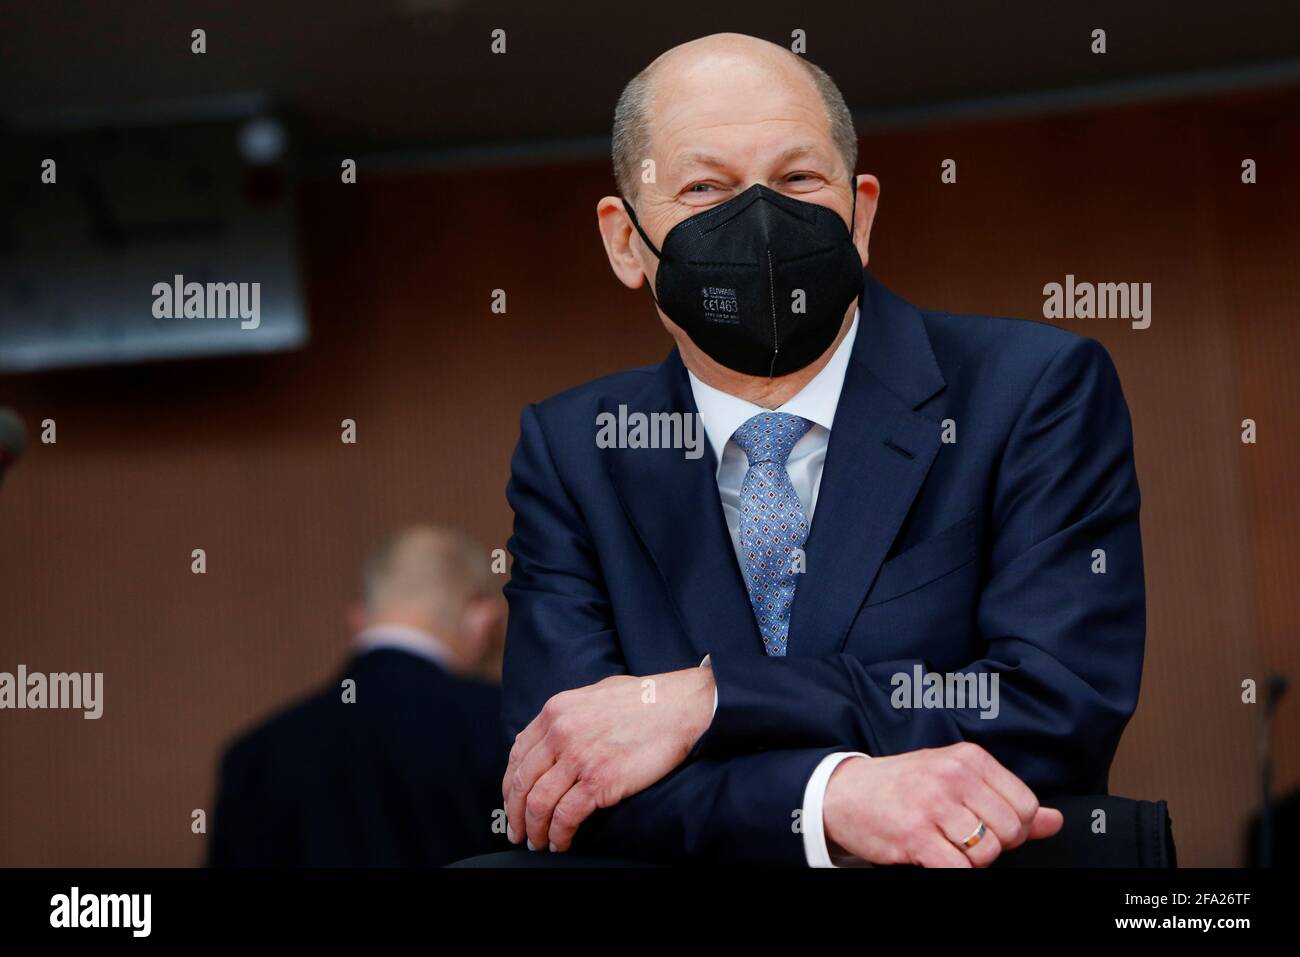 Berlin, Germany. 22nd Apr, 2021. Federal Finance Minister Olaf Scholz (SPD) sits before the Committee of Inquiry into the Wirecard accounting scandal in the German Bundestag. The 3rd Bundestag Committee of Inquiry is to investigate the conduct of the Federal Government and its subordinate authorities in connection with the events surrounding the now insolvent financial services provider Wirecard. Credit: Michele Tantussi/Reuters/Pool/dpa/Alamy Live News Stock Photo